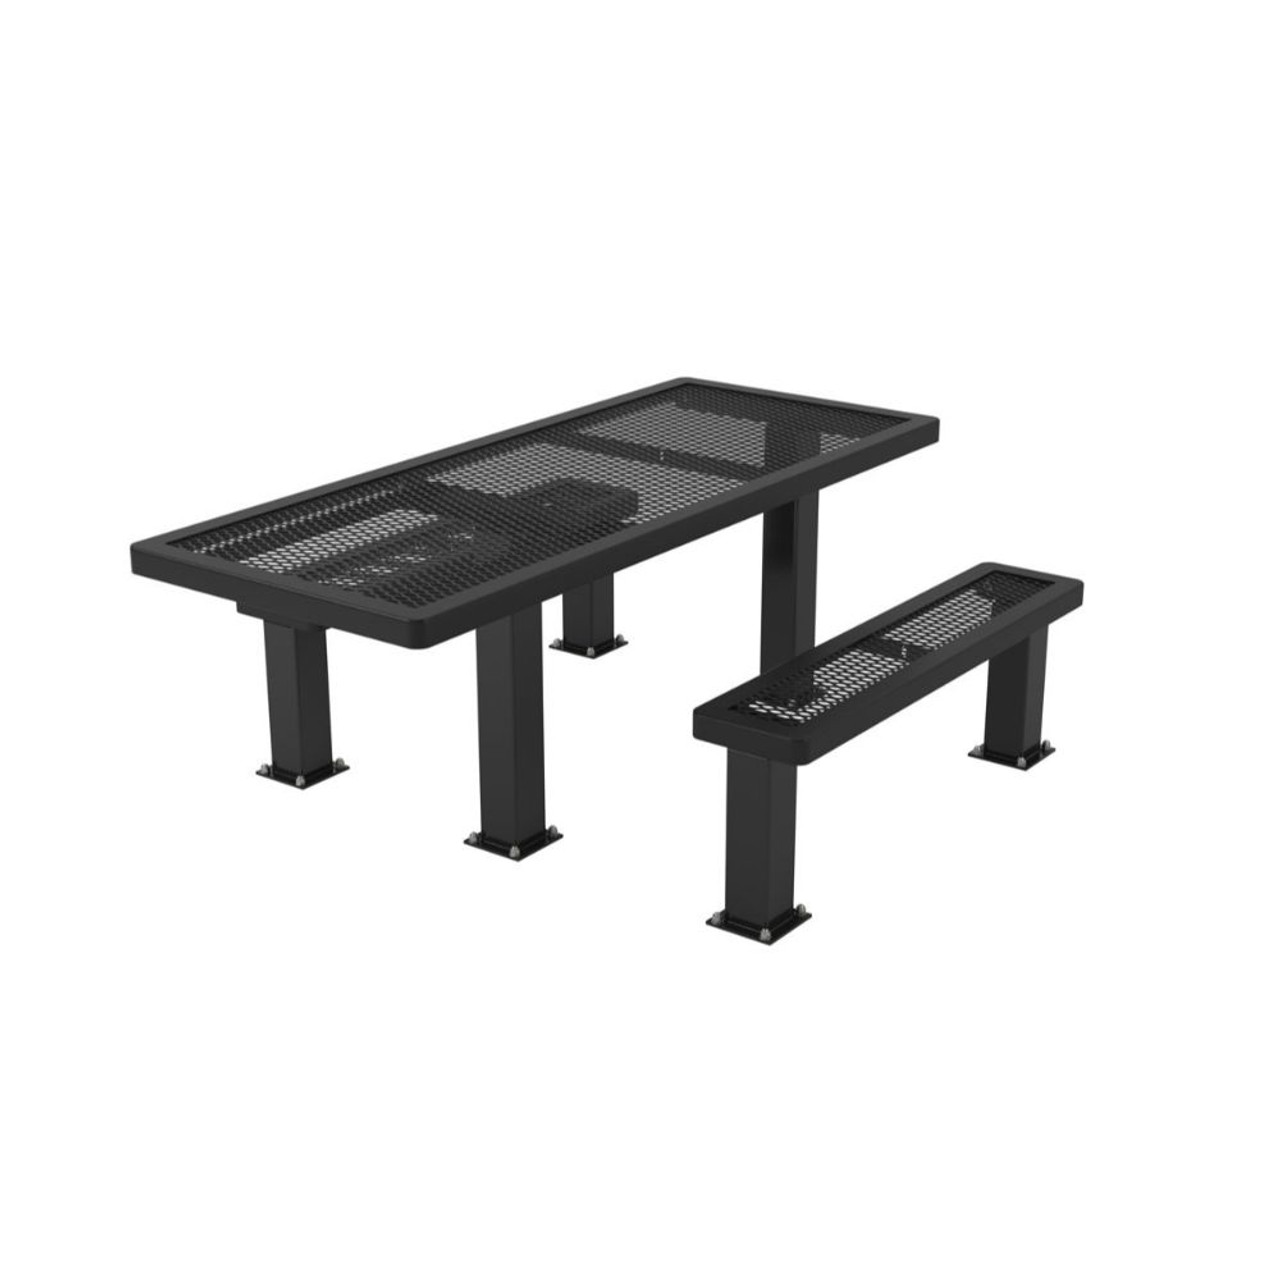 Regal Accessible 4-4 Table with 2 benches - surface mount